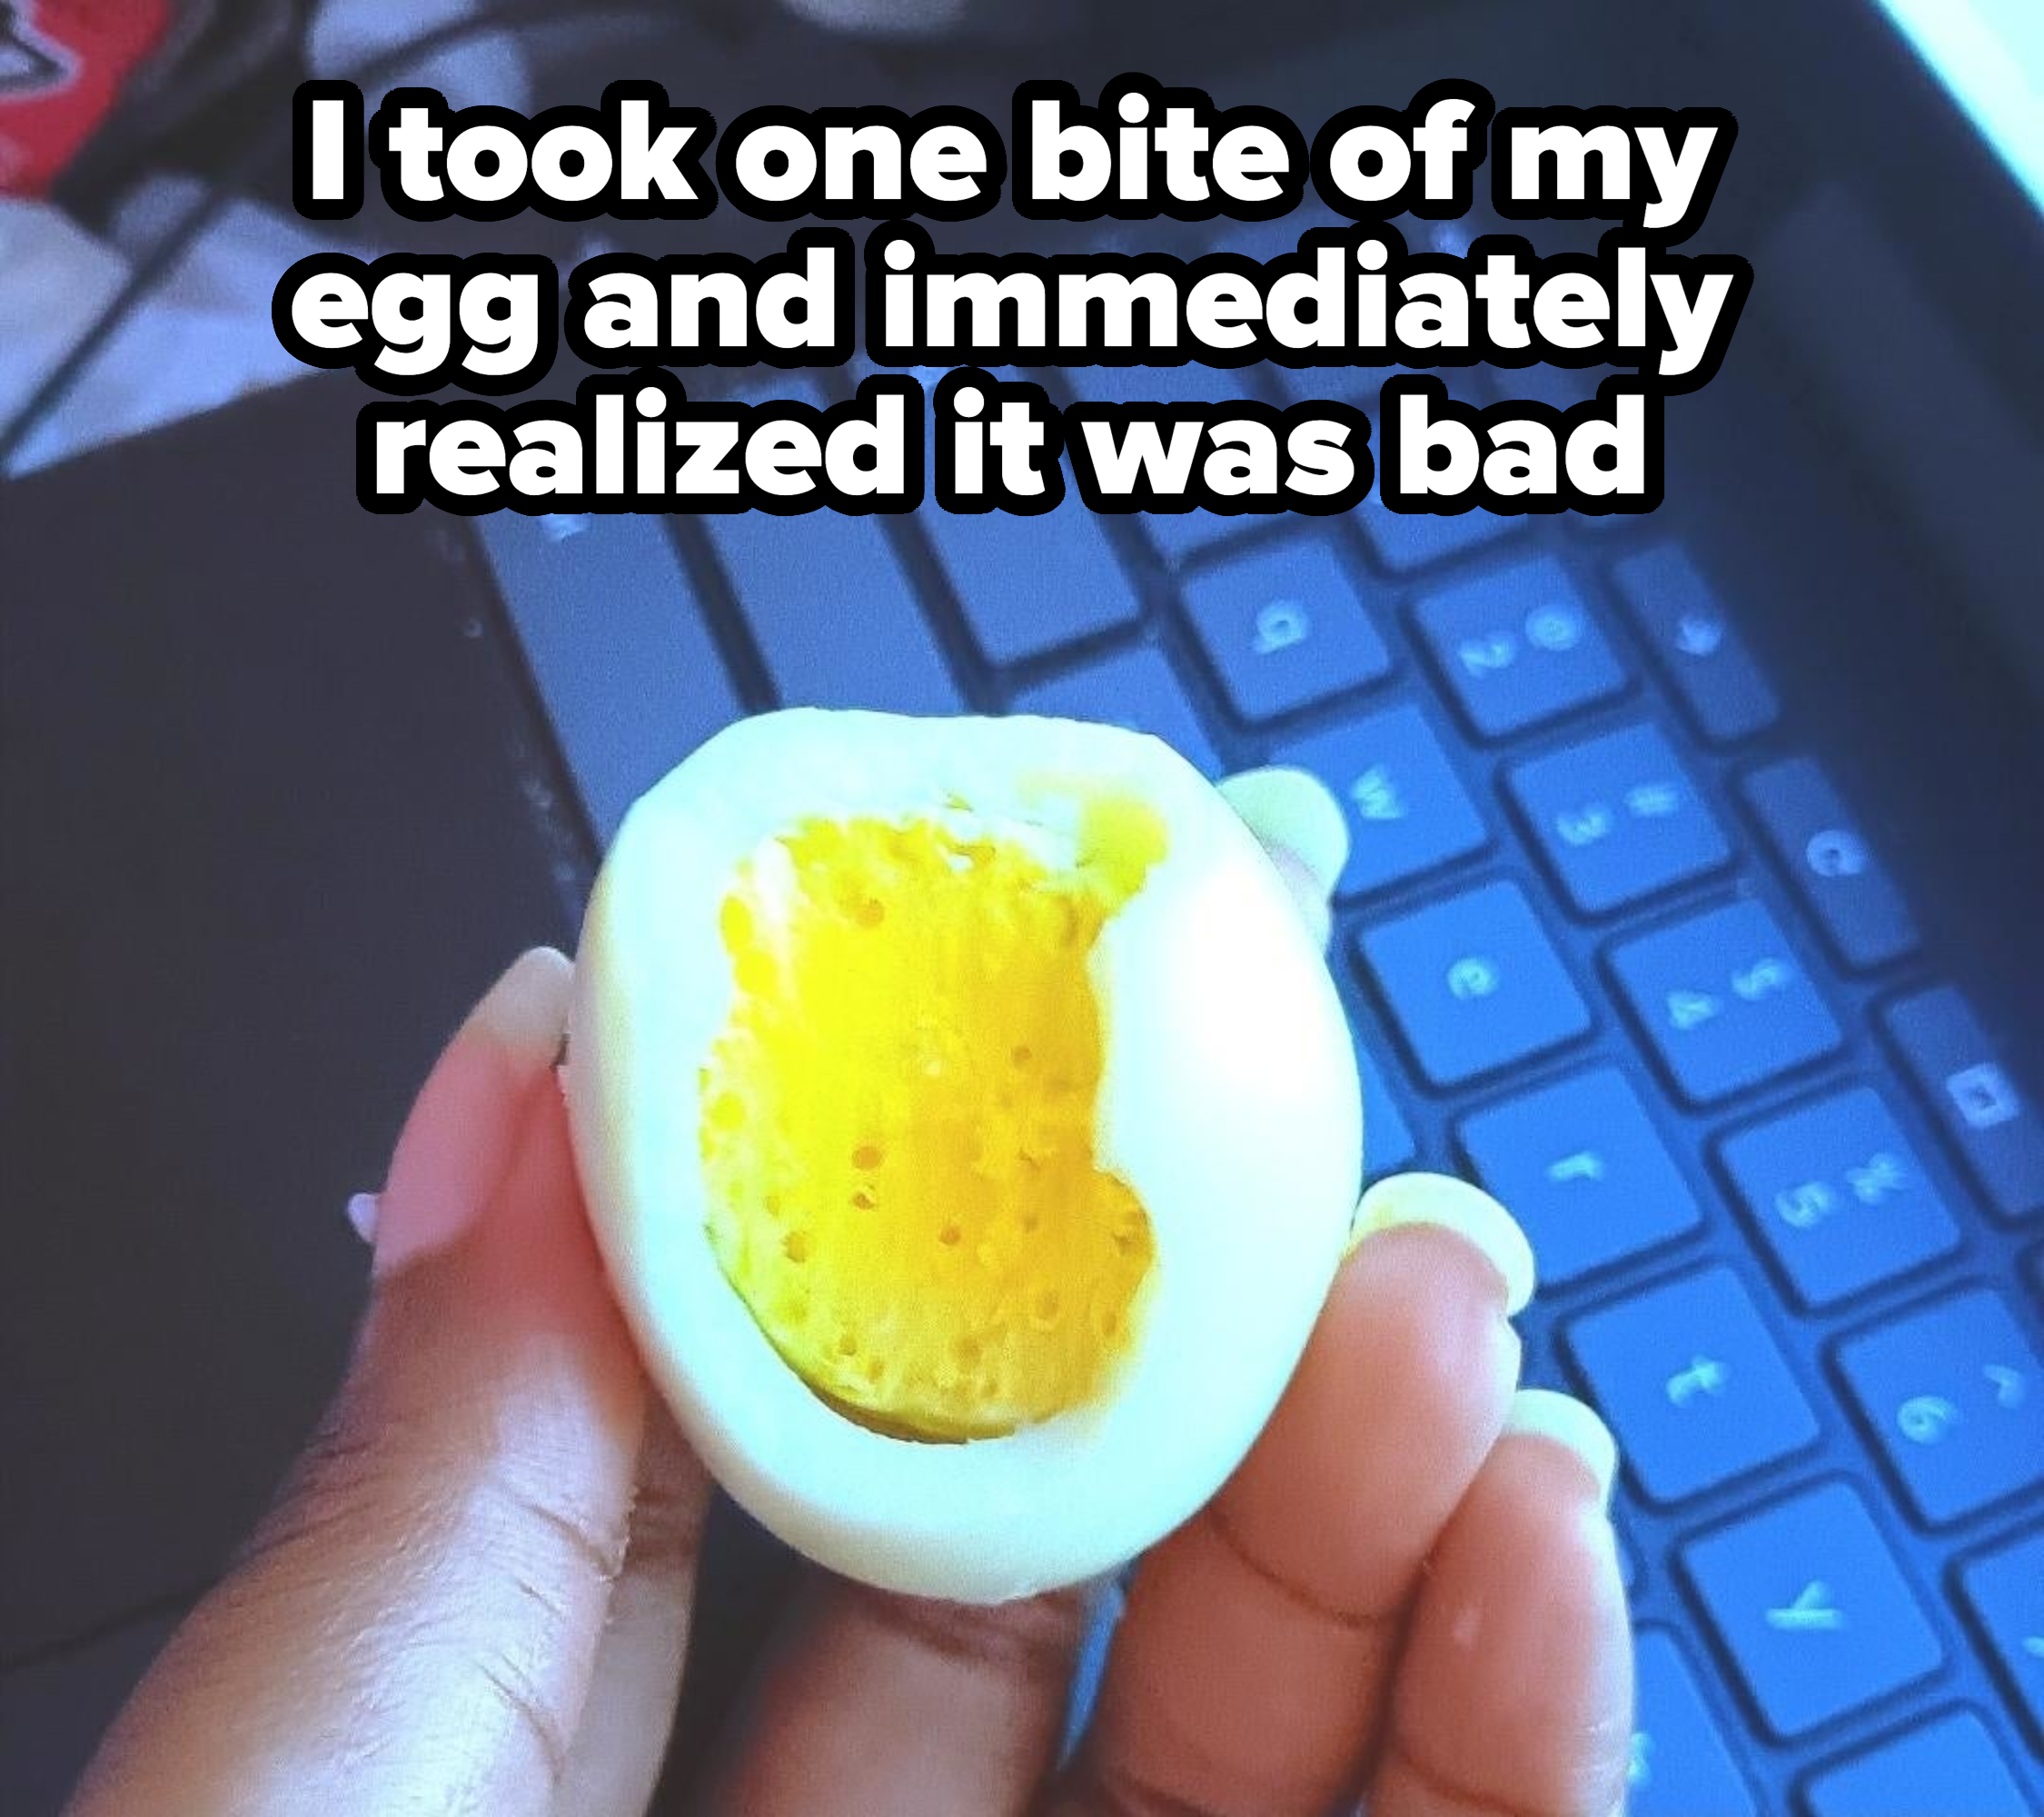 Person holding a half-eaten boiled egg over a laptop keyboard